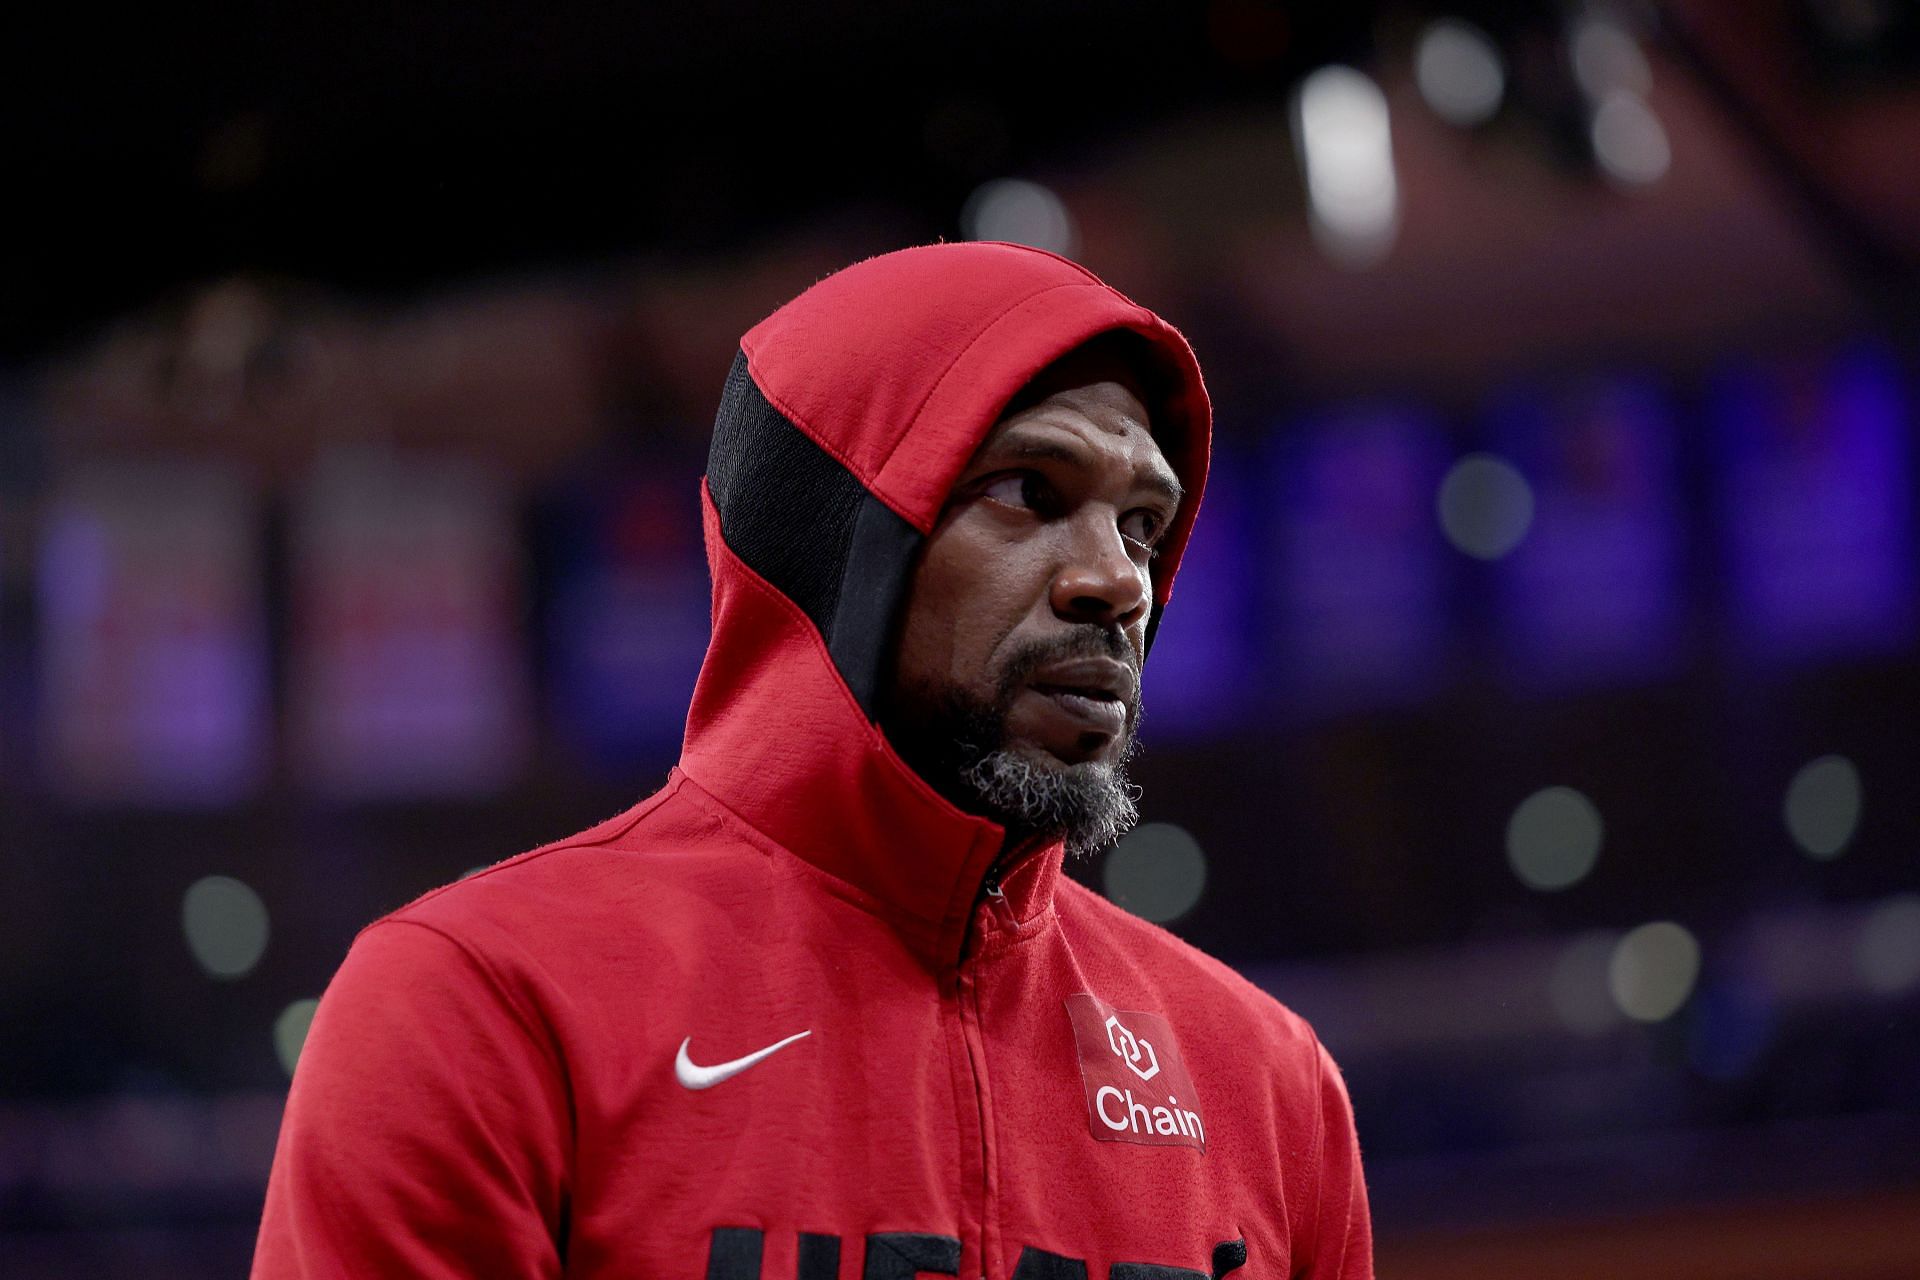 Haslem has spent his entire career with the Miami Heat